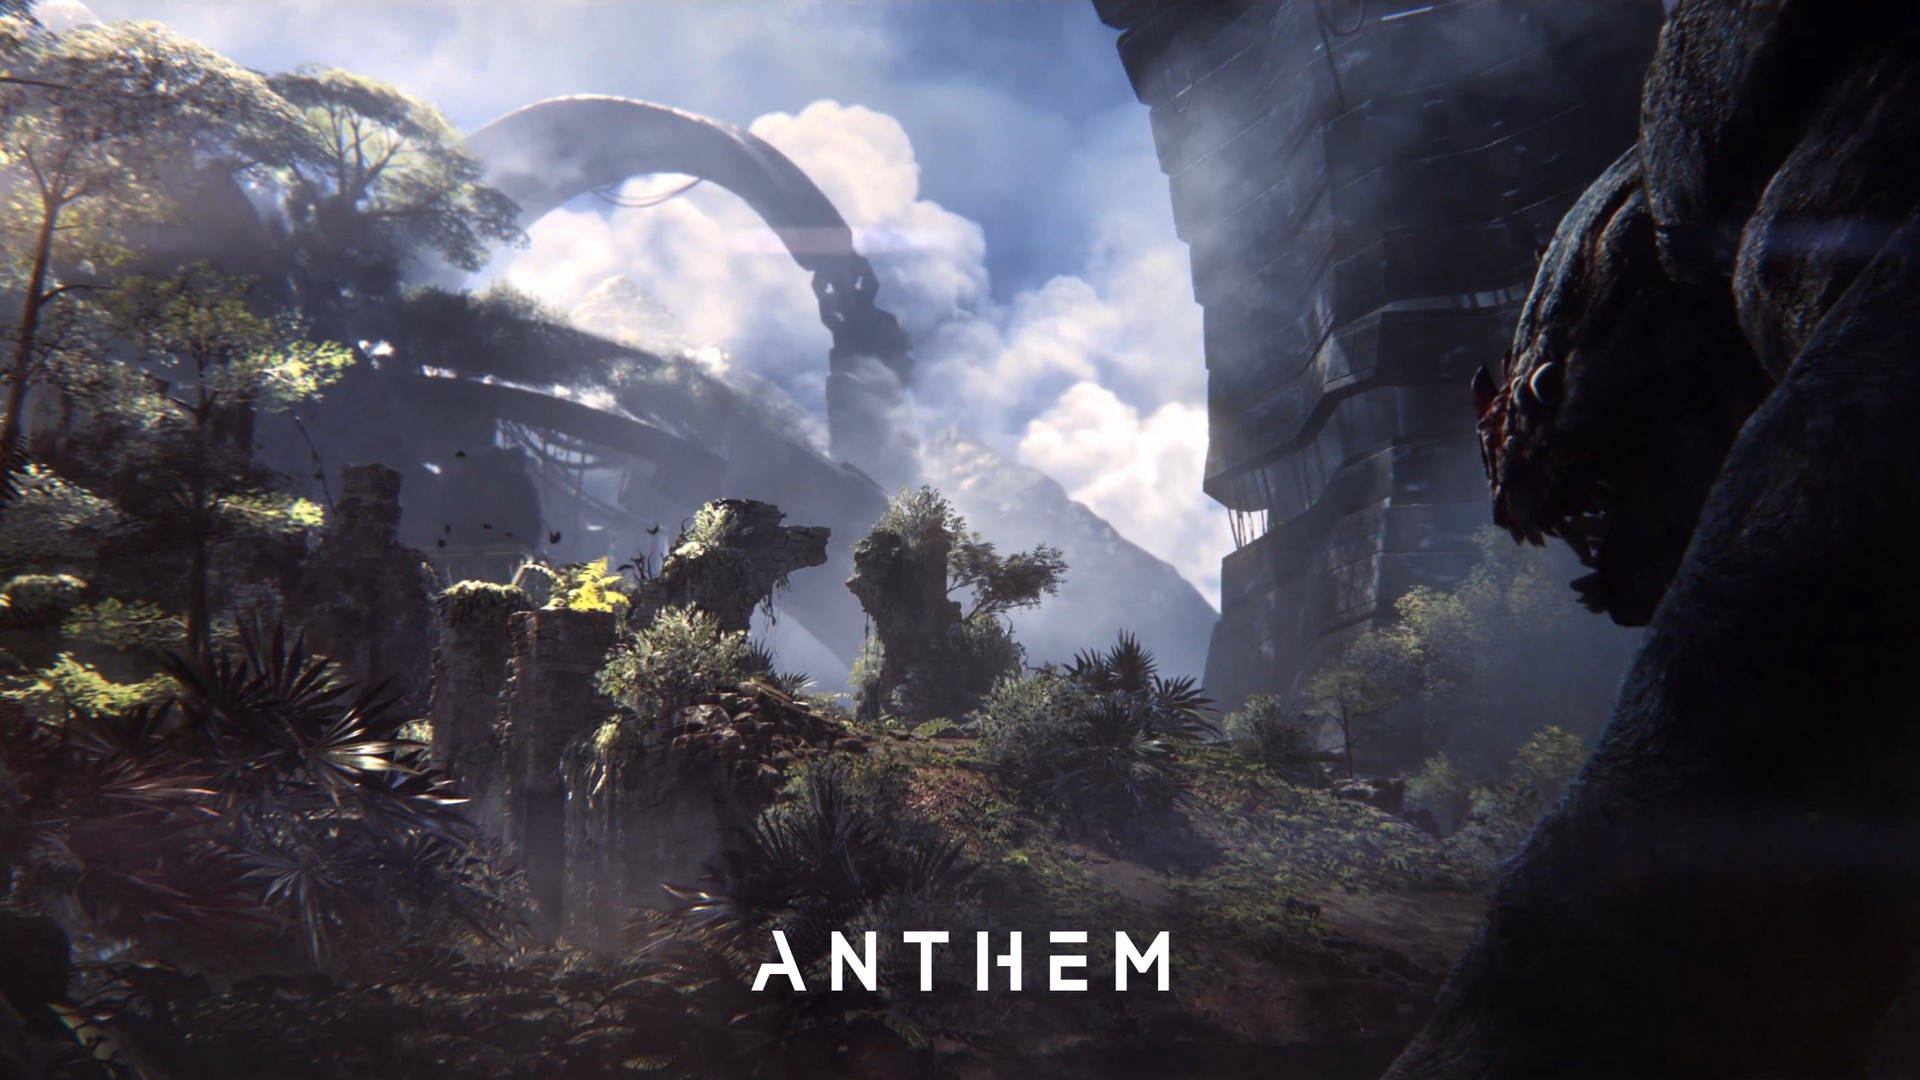 Visit the mystical Fortress of Anthem Wallpaper